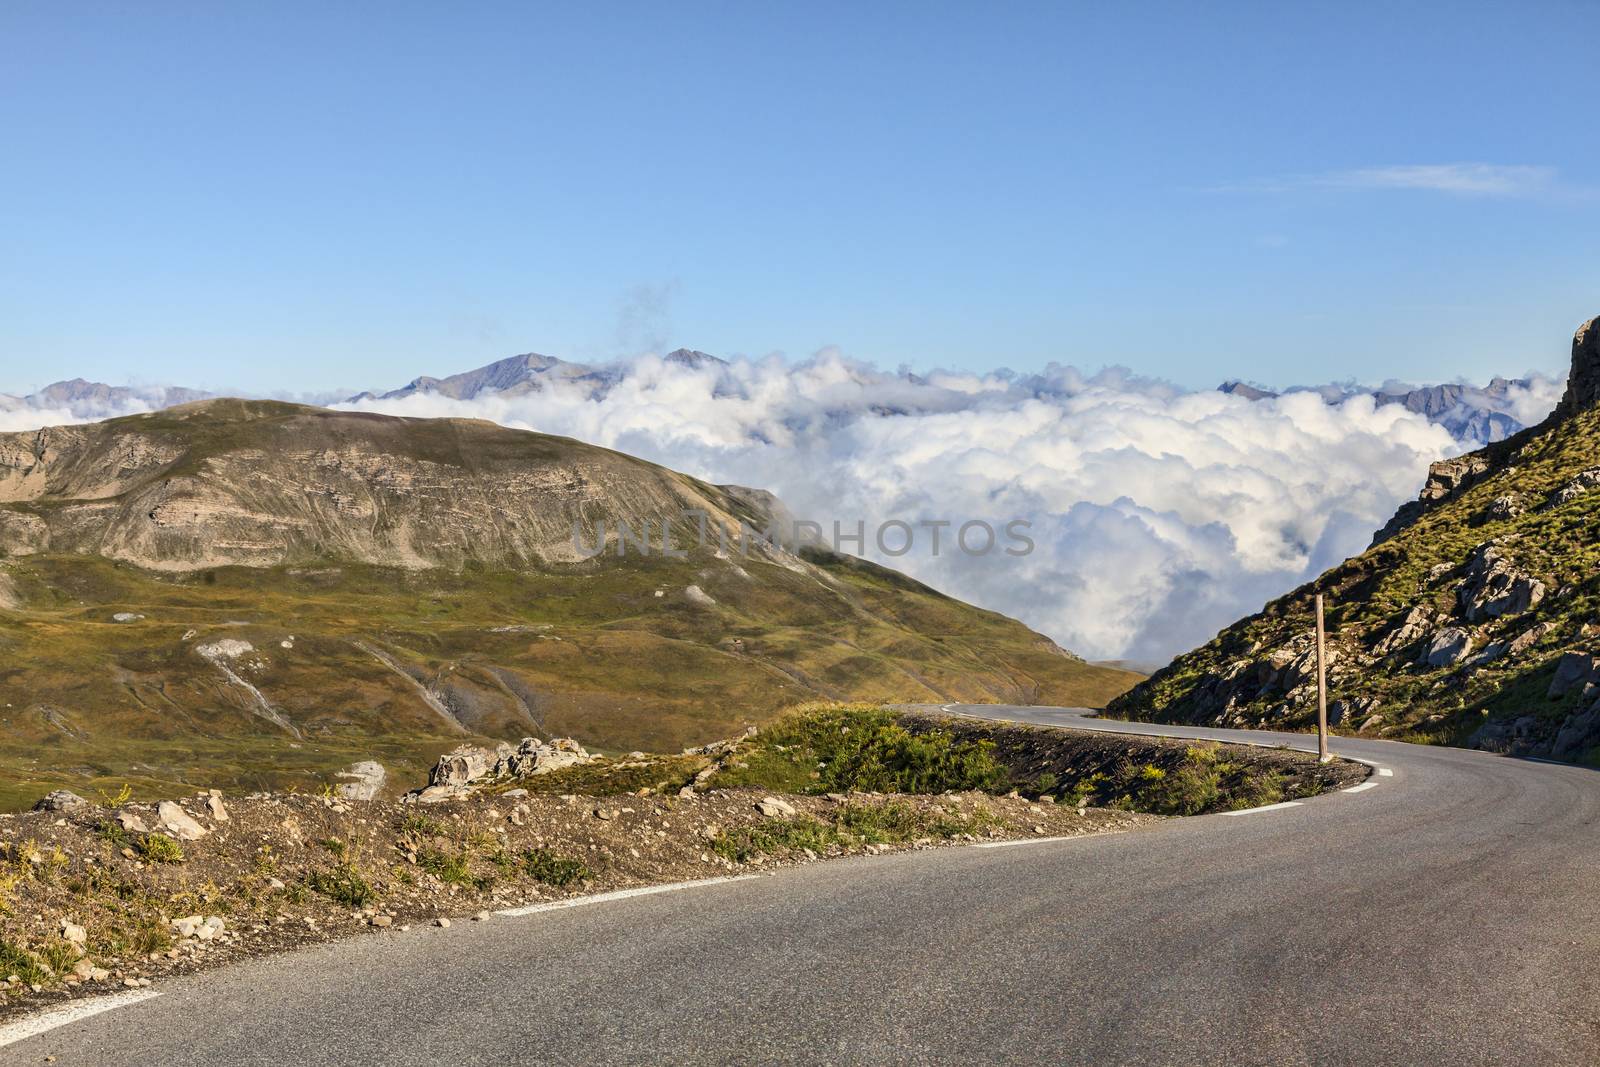 Image of the highest part of the road to Cime de la Bonette which is the highest asphalted road (2860 m) in Europe. It is located at the border between the  Alpes-Maritimes and Alpes-de-Haute-Provence in the Mercantour National Park in soth of France.